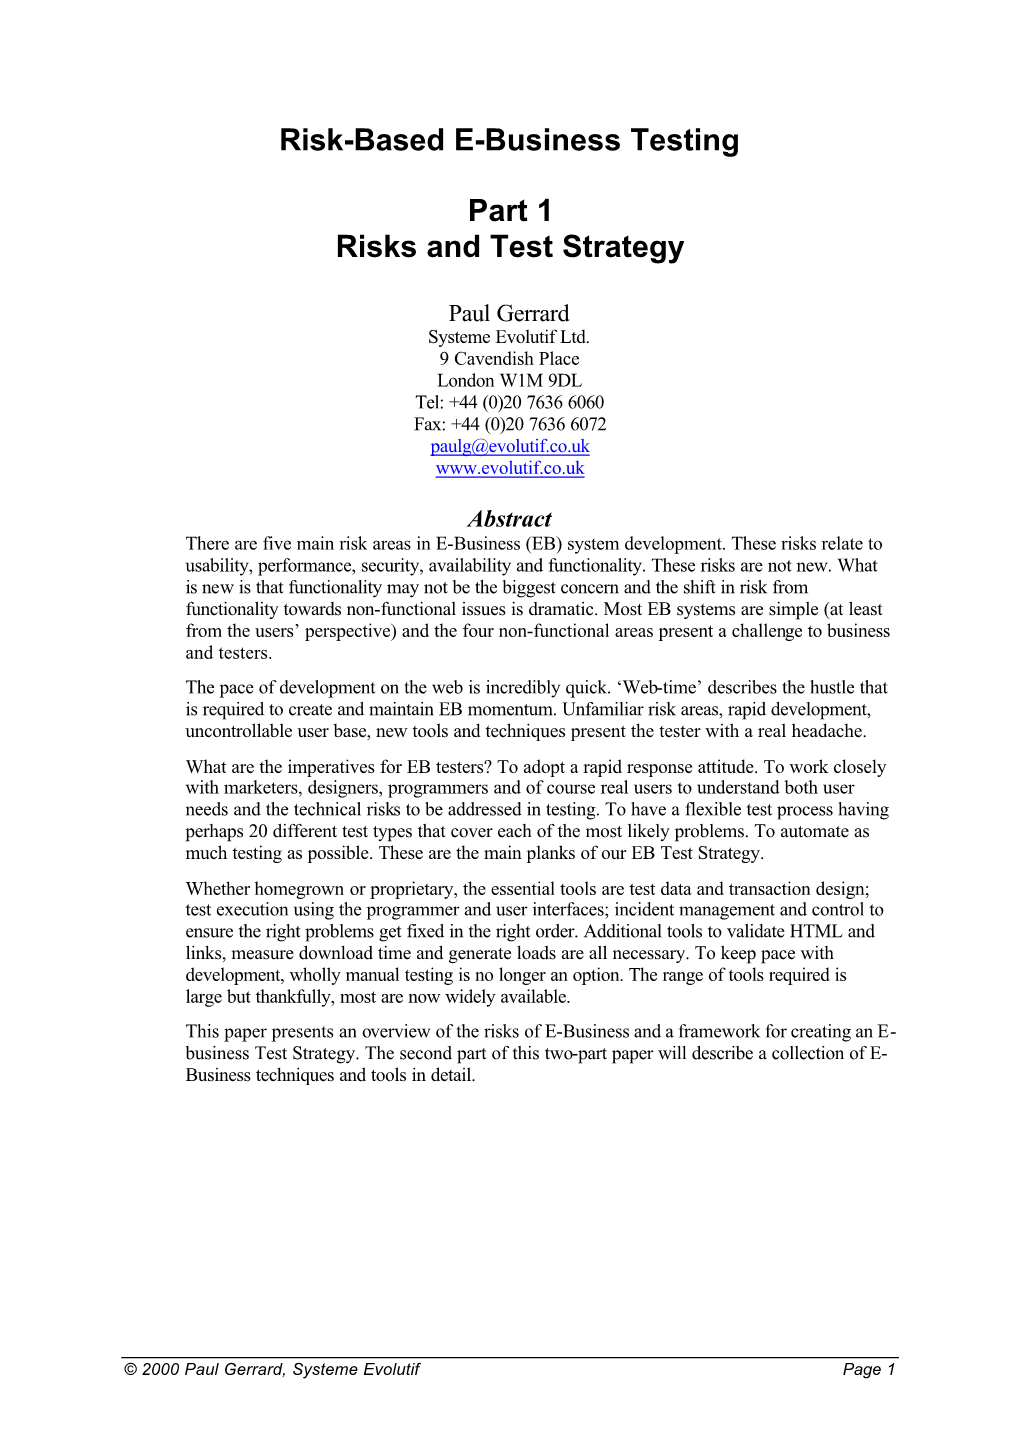 Risk-Based E-Business Testing Part 1 Risks and Test Strategy